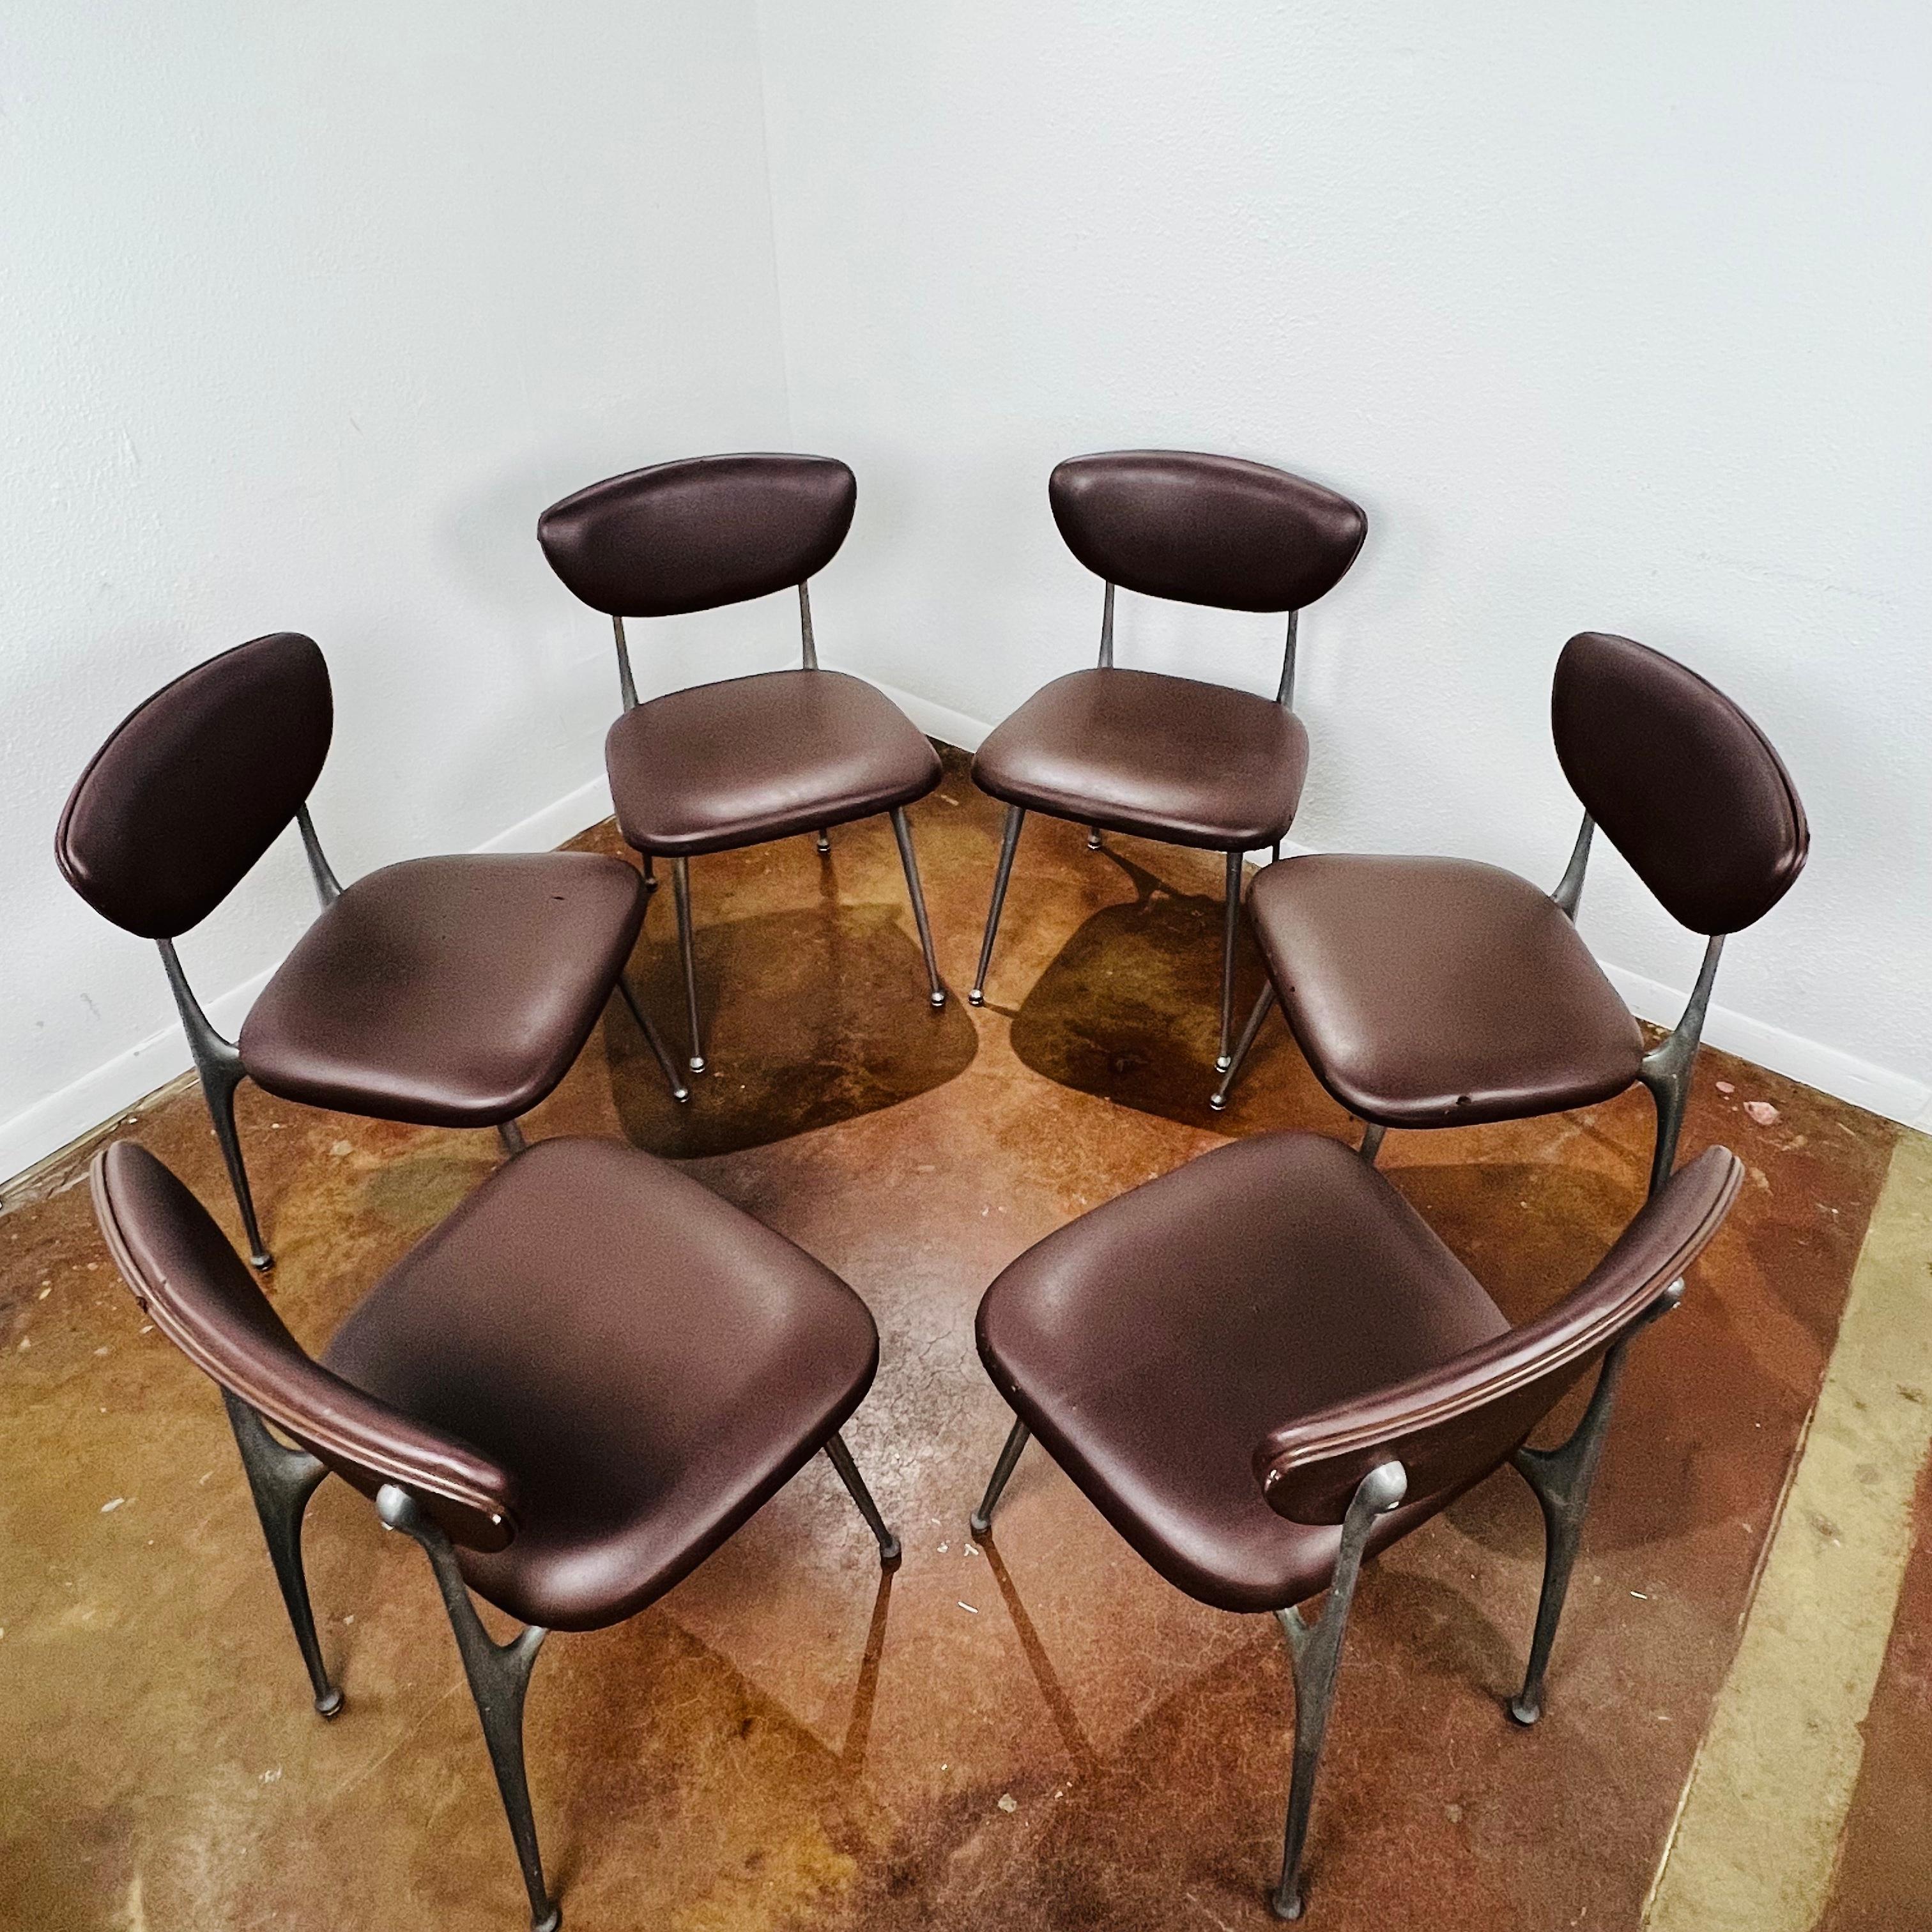 Set of 8 Aluminum Gazelle Chairs by Shelby Williams 4